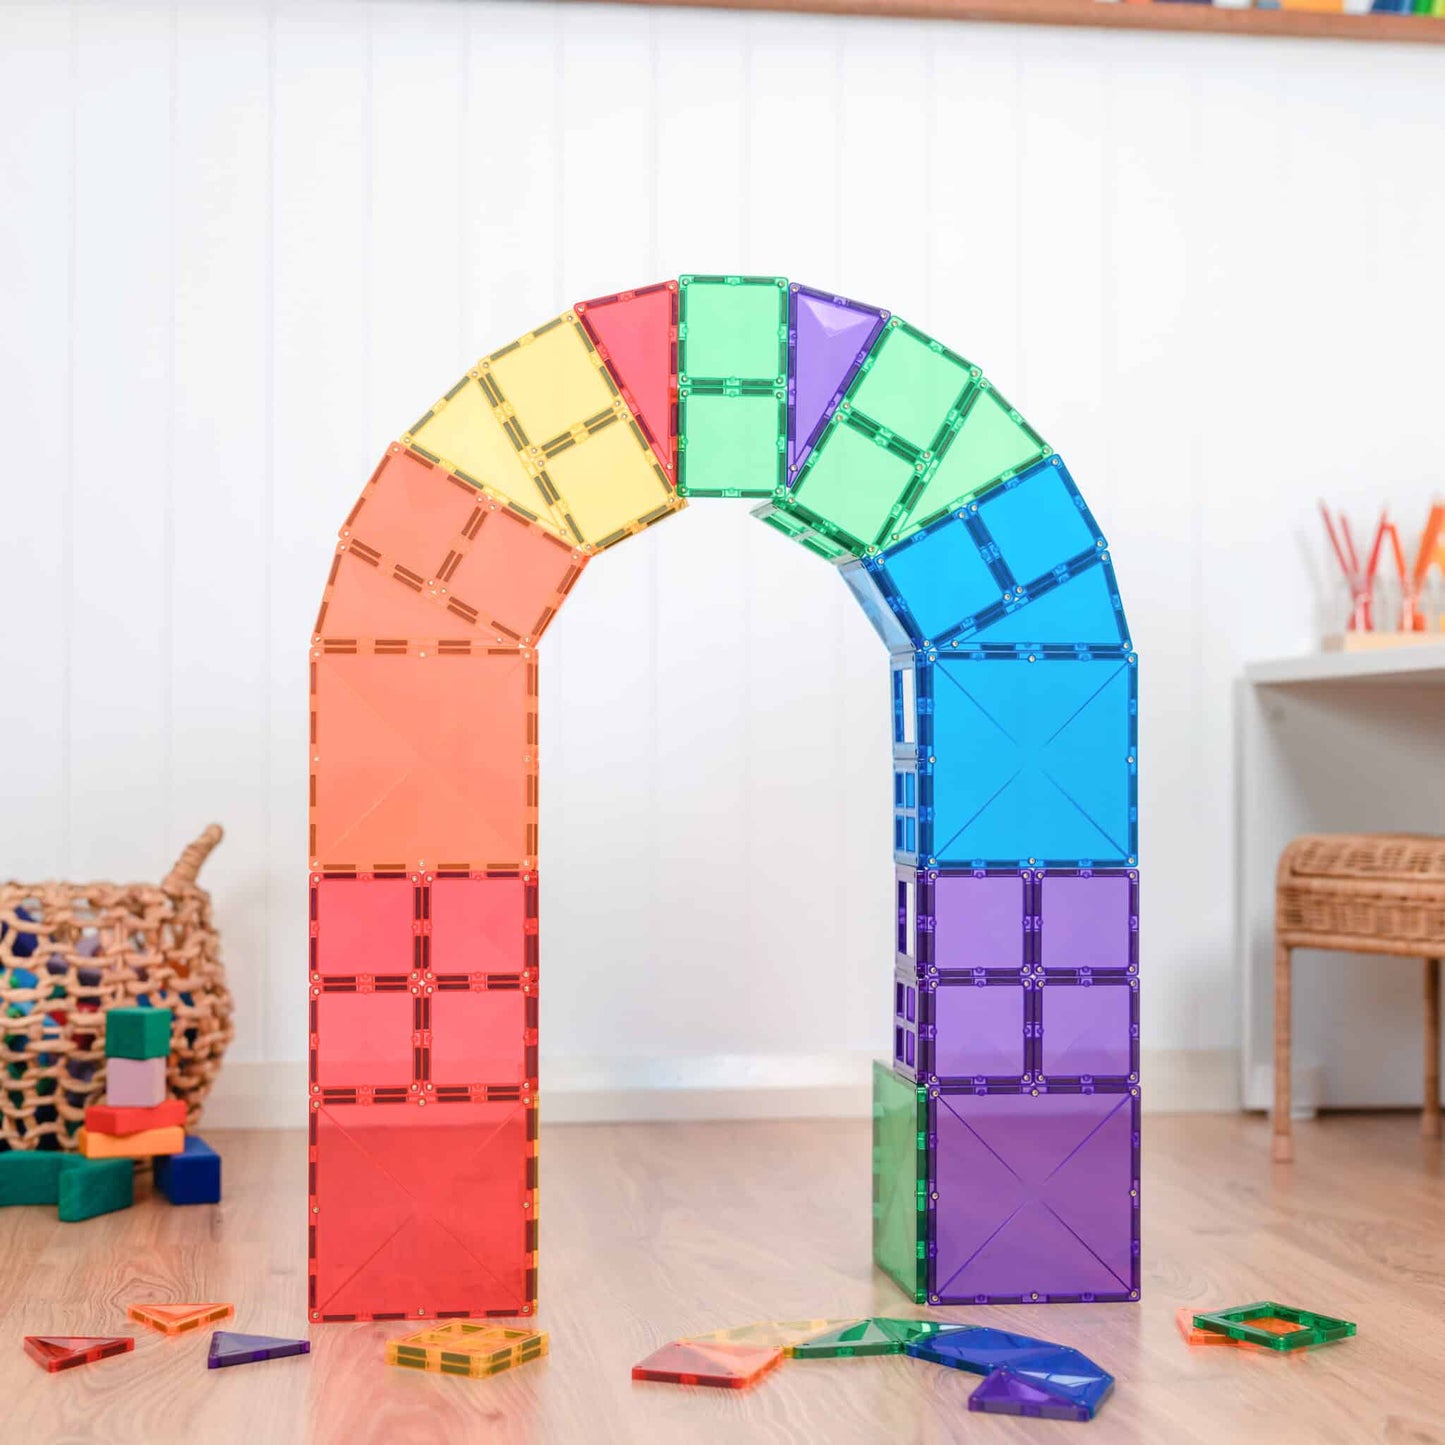 [Connetix Tiles] 60 Piece Rainbow Starter Pack | Educational Magnetic Tiles Learning Toy